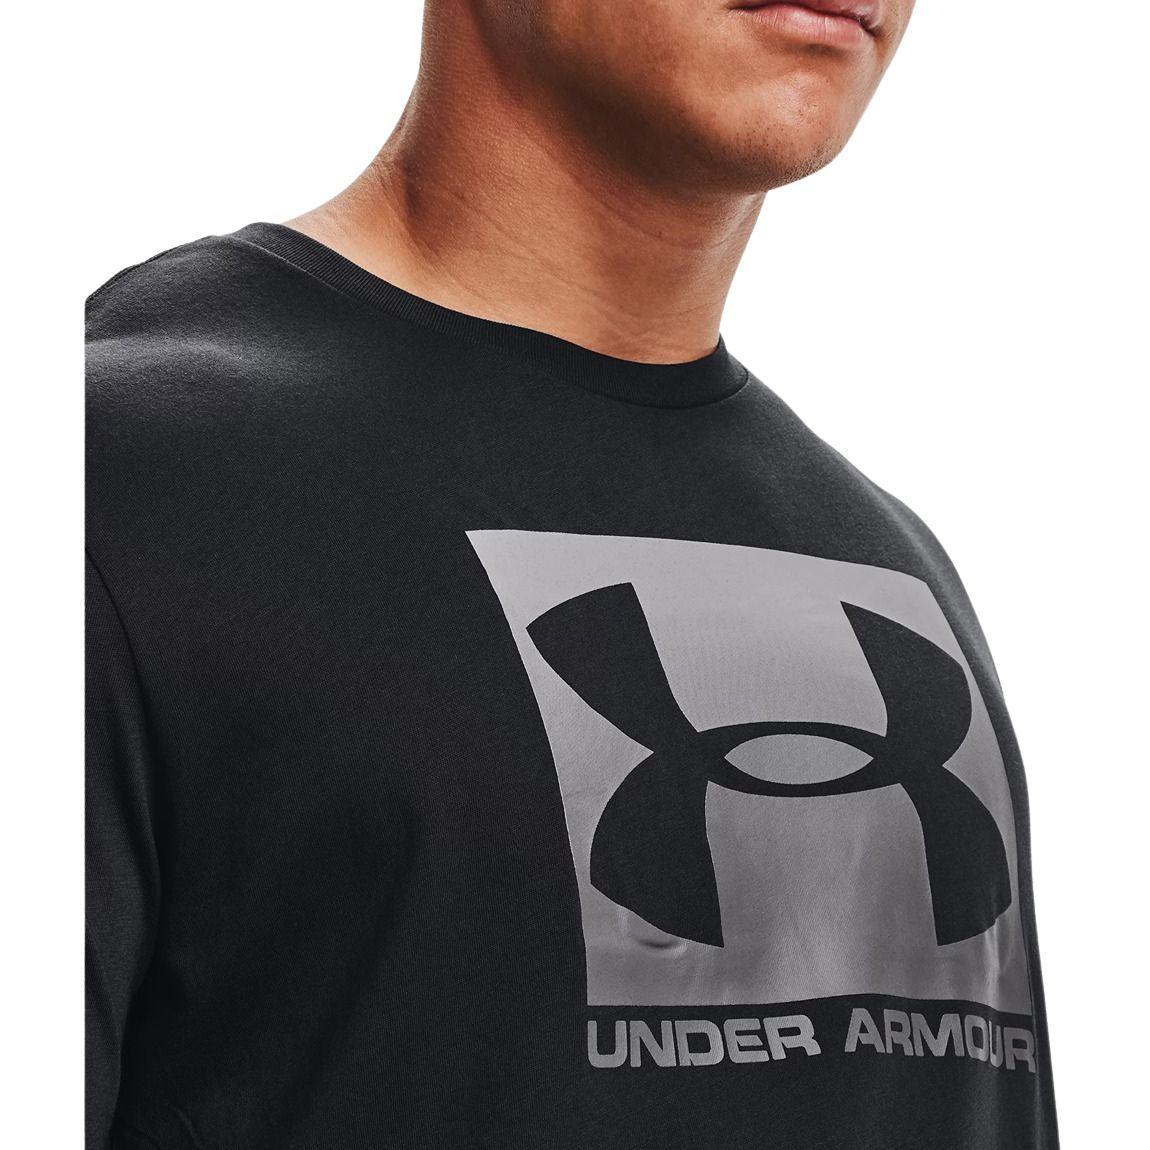 Under Armour Boxed Sportstyle Short Sleeve T-Shirt - Men